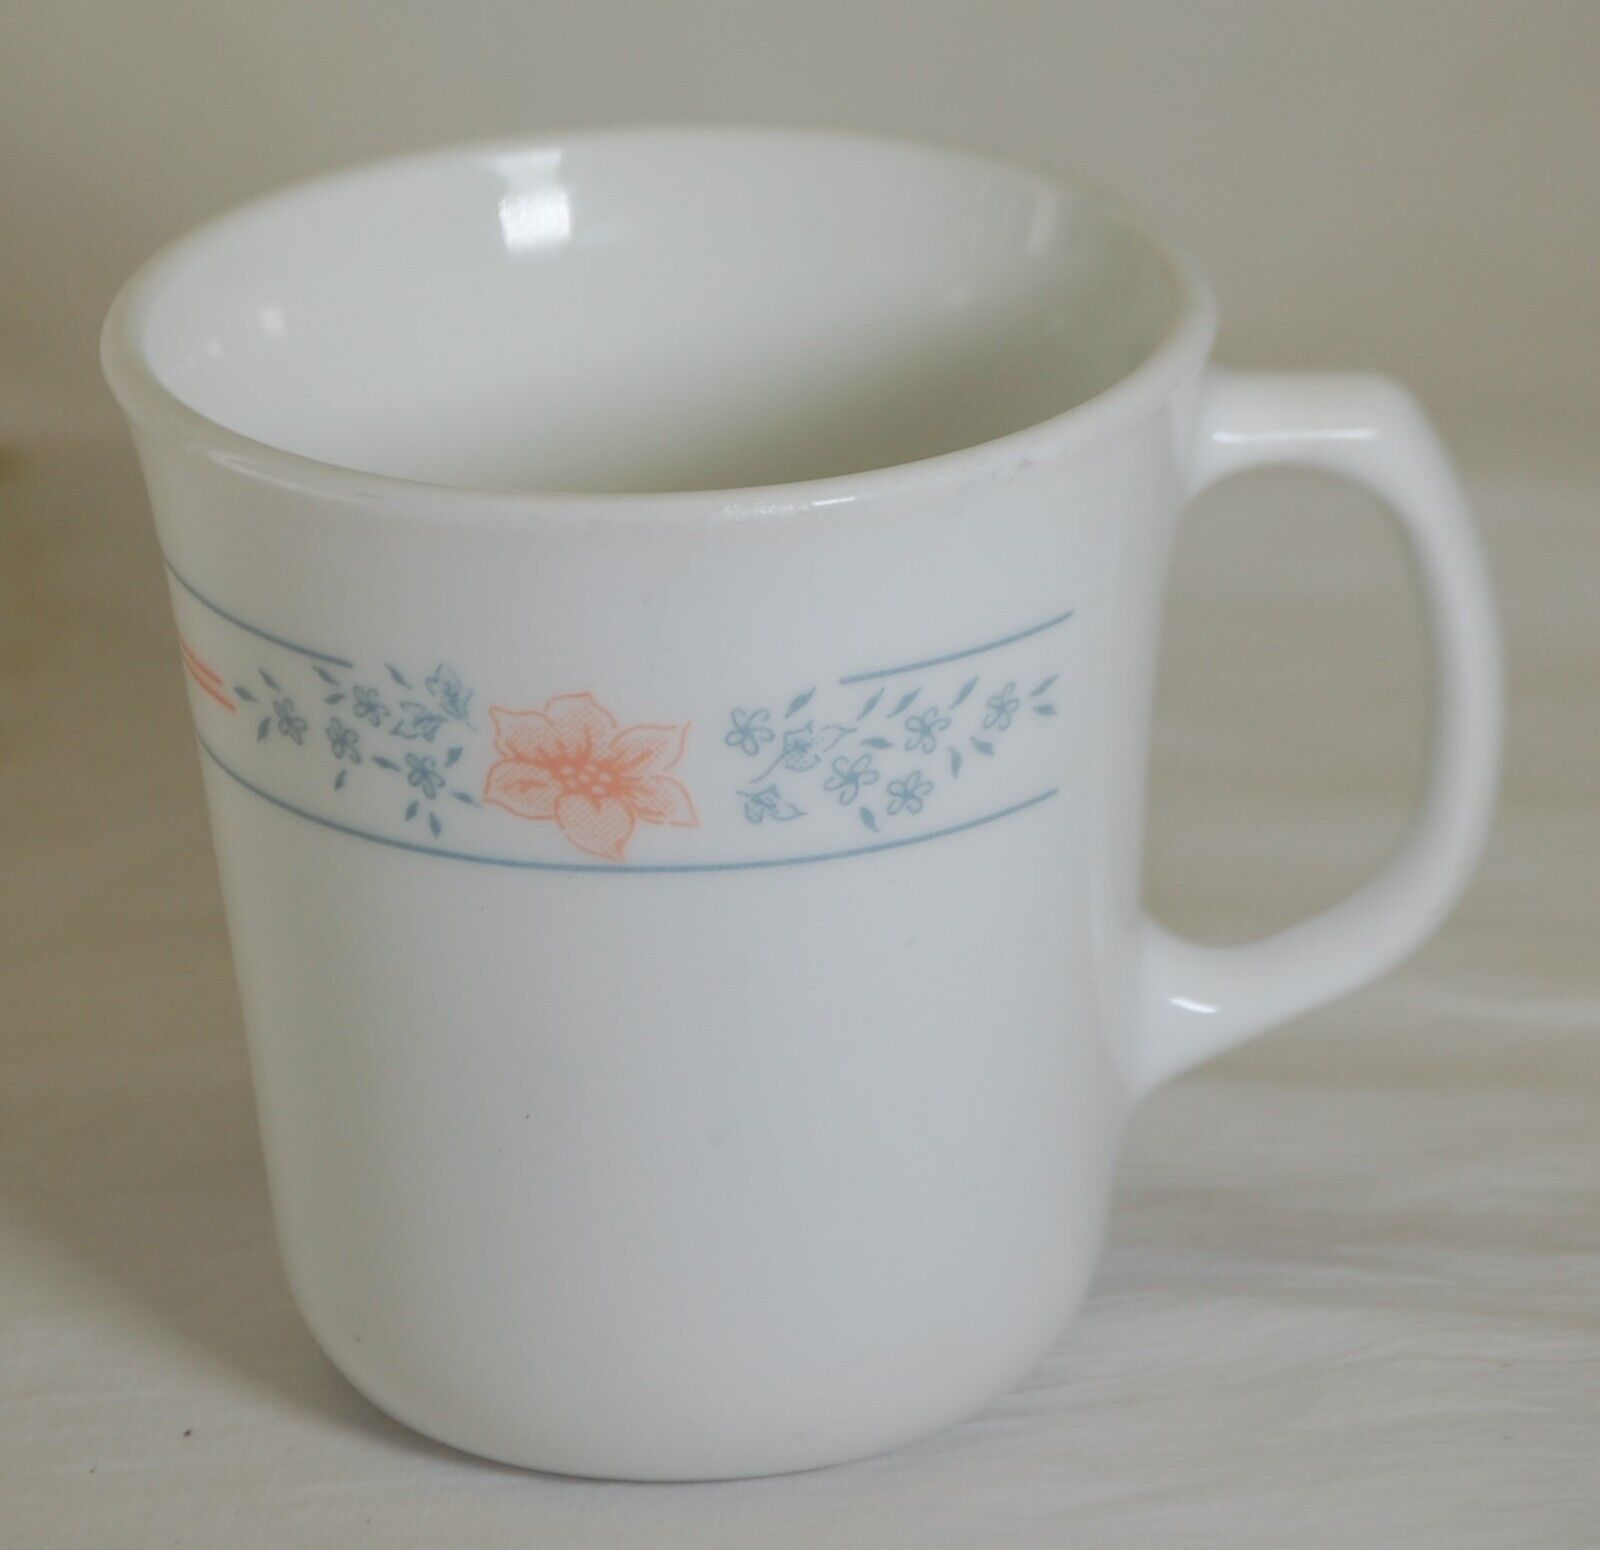 Apricot Grove Corelle Corning Coffee Cup Mug Peach Flowers with Grey Leaves - $12.86